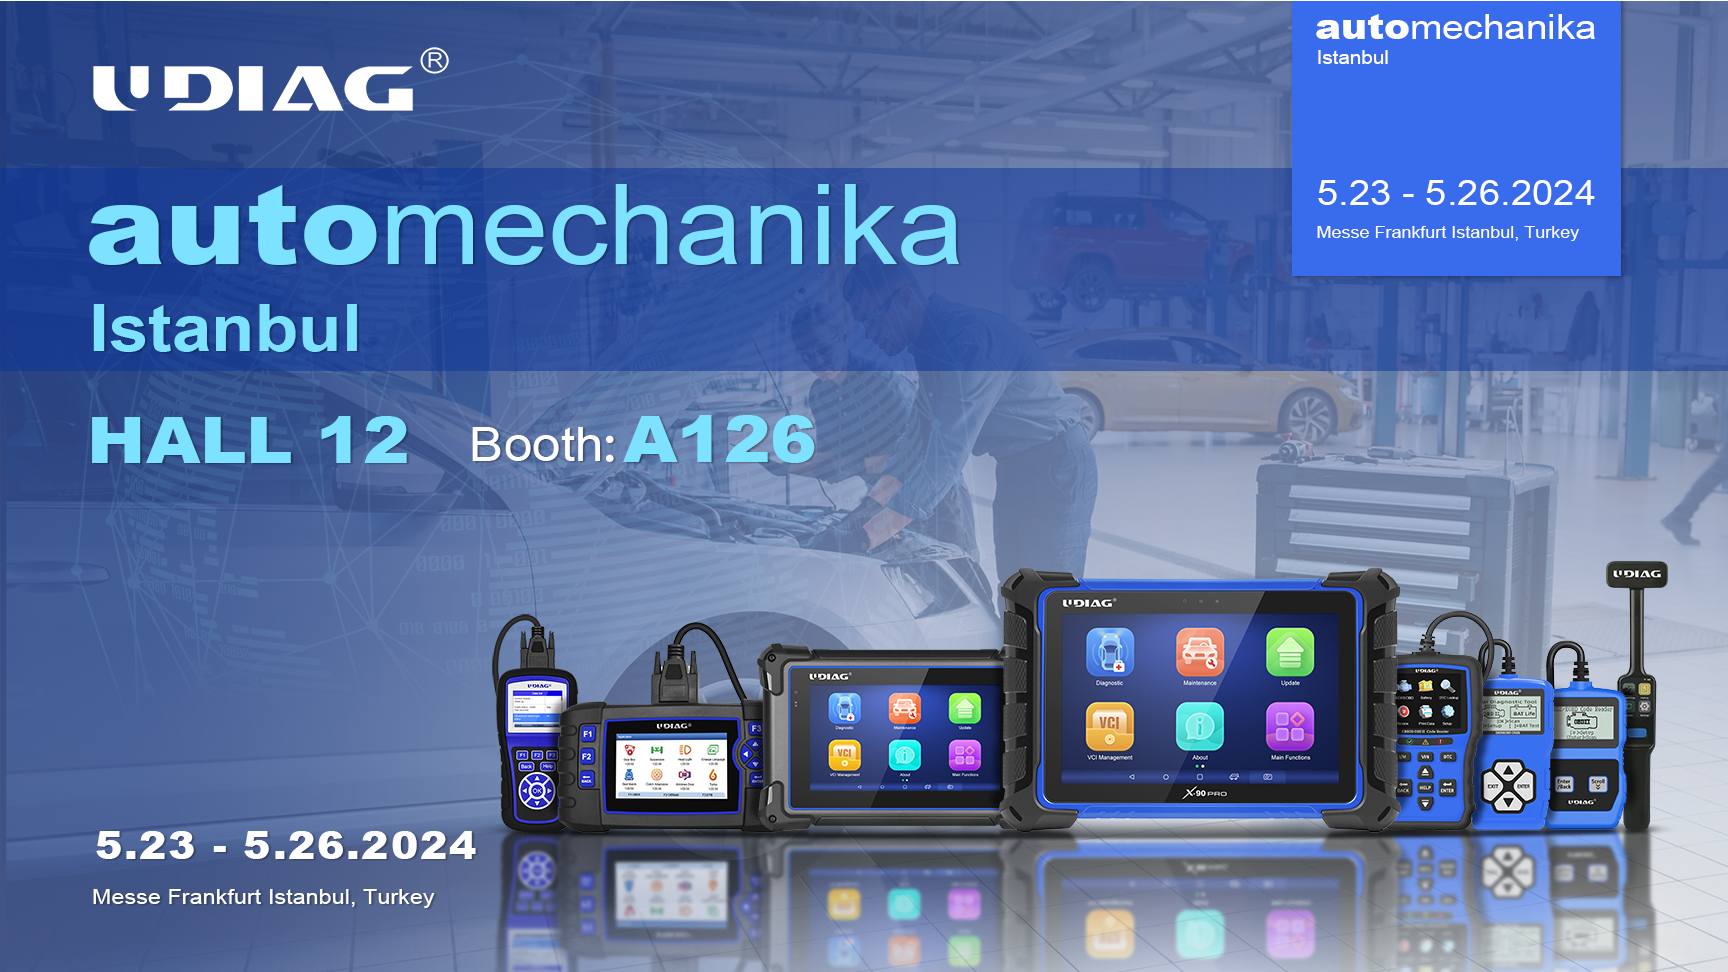 Automechanika Istanbul 2024 in Turkey from May 23th to 26th